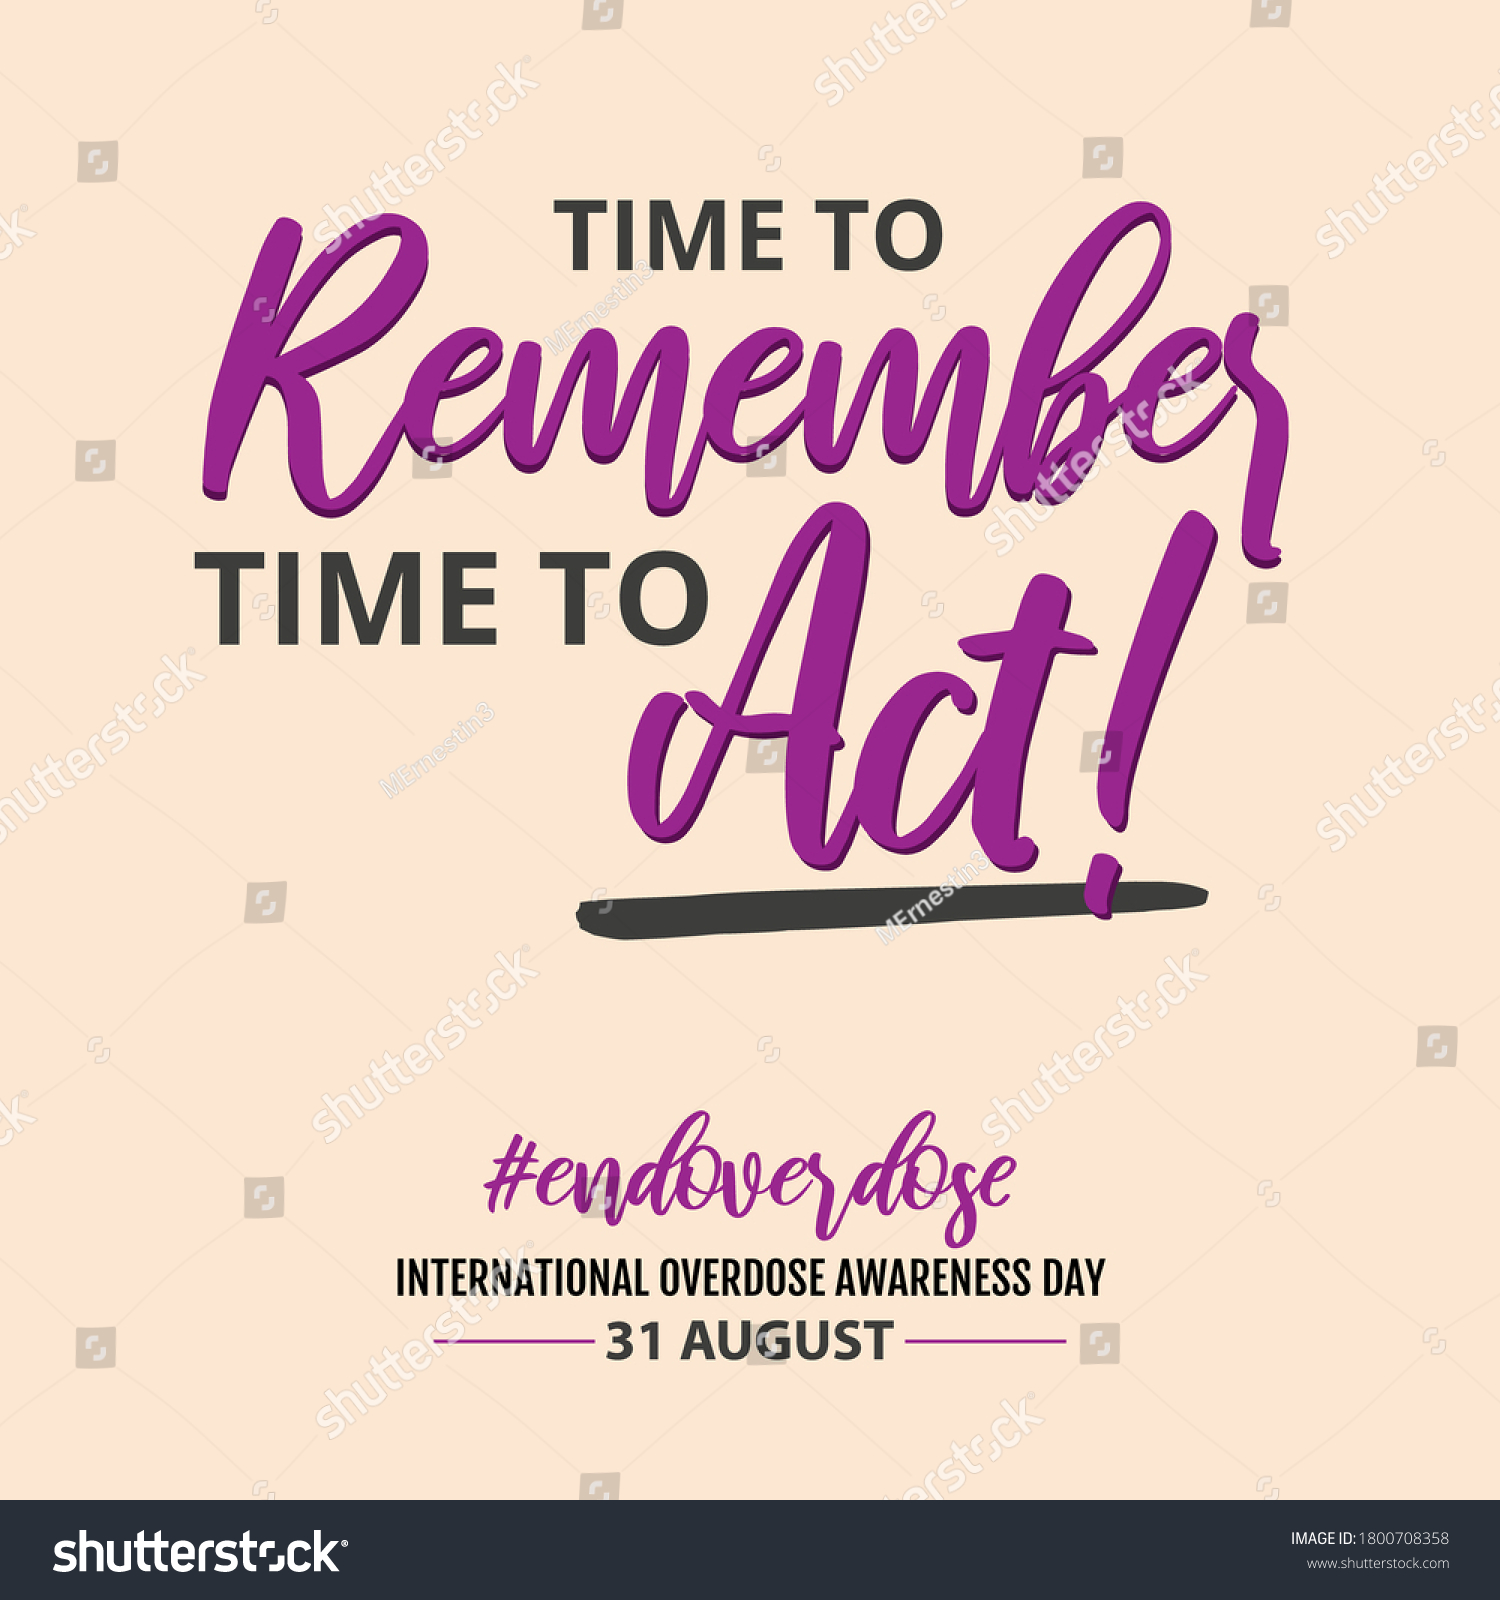 Time Remember Time Act Lettering Poster Stock Vector Royalty Free 1800708358 Shutterstock 